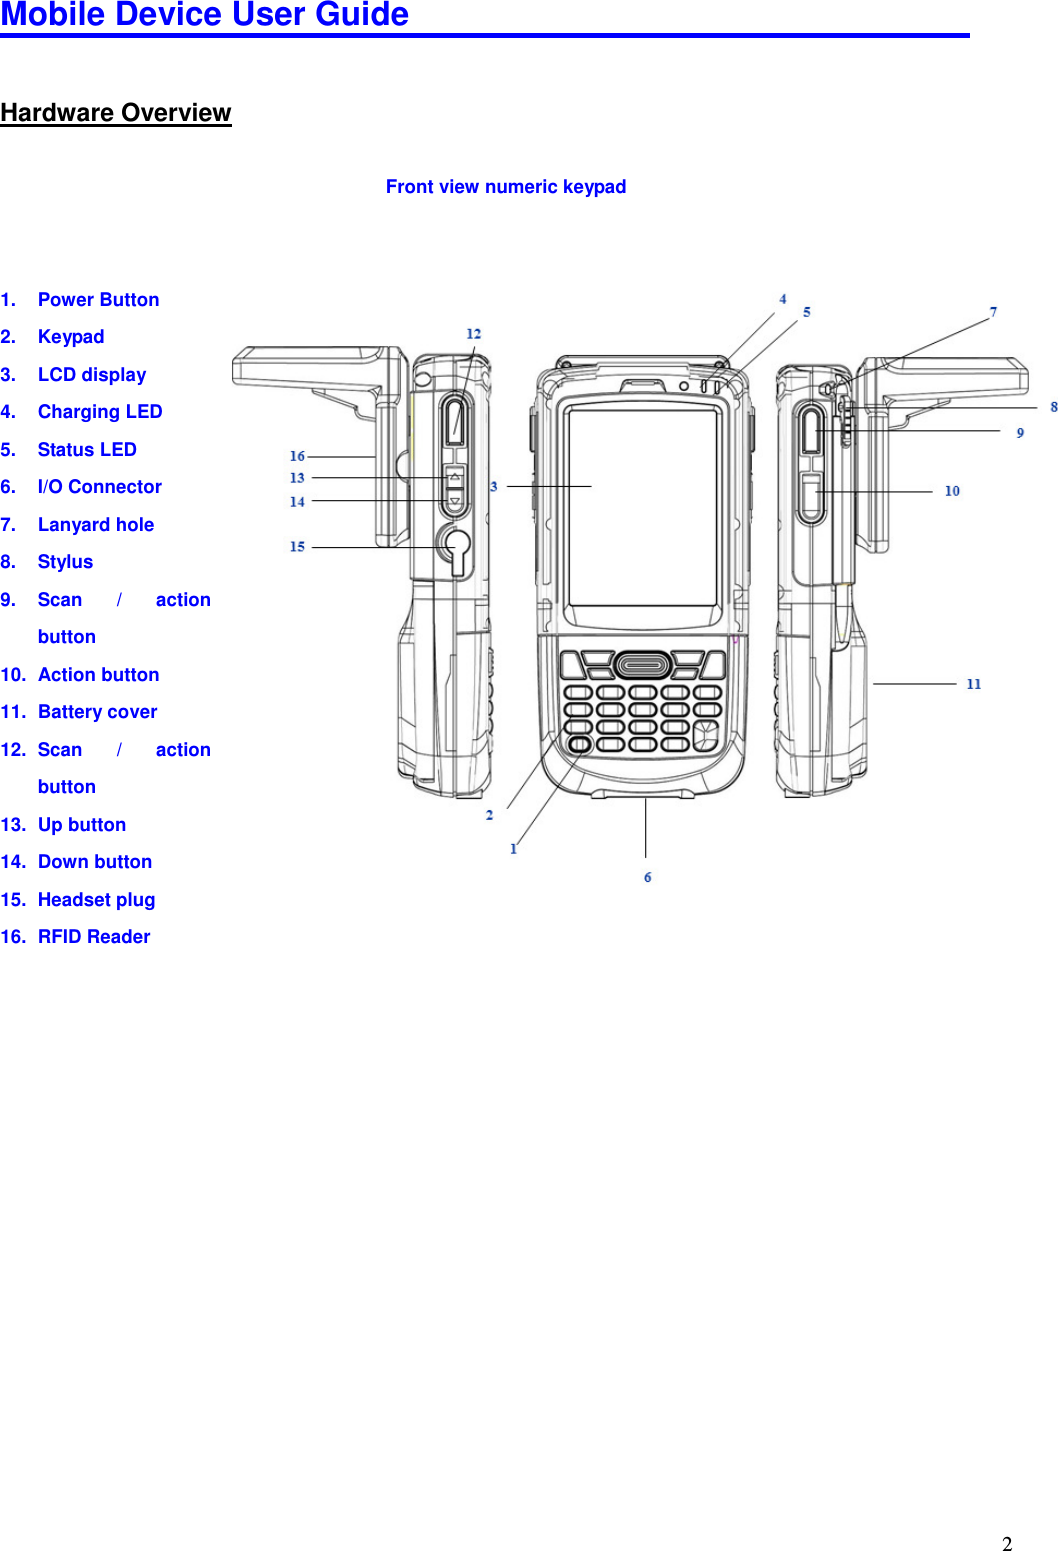 Mobile Device User Guide                                                                                                                                                                                                                                                                                                                                                                                                                                                                                                                                         2Hardware Overview Front view numeric keypad   1.  Power Button 2.  Keypad 3.  LCD display 4.  Charging LED 5.  Status LED 6.  I/O Connector 7.  Lanyard hole 8.  Stylus 9.  Scan  /  action button 10.  Action button 11.  Battery cover 12.  Scan  /  action button 13.  Up button 14.  Down button 15.  Headset plug 16.  RFID Reader 